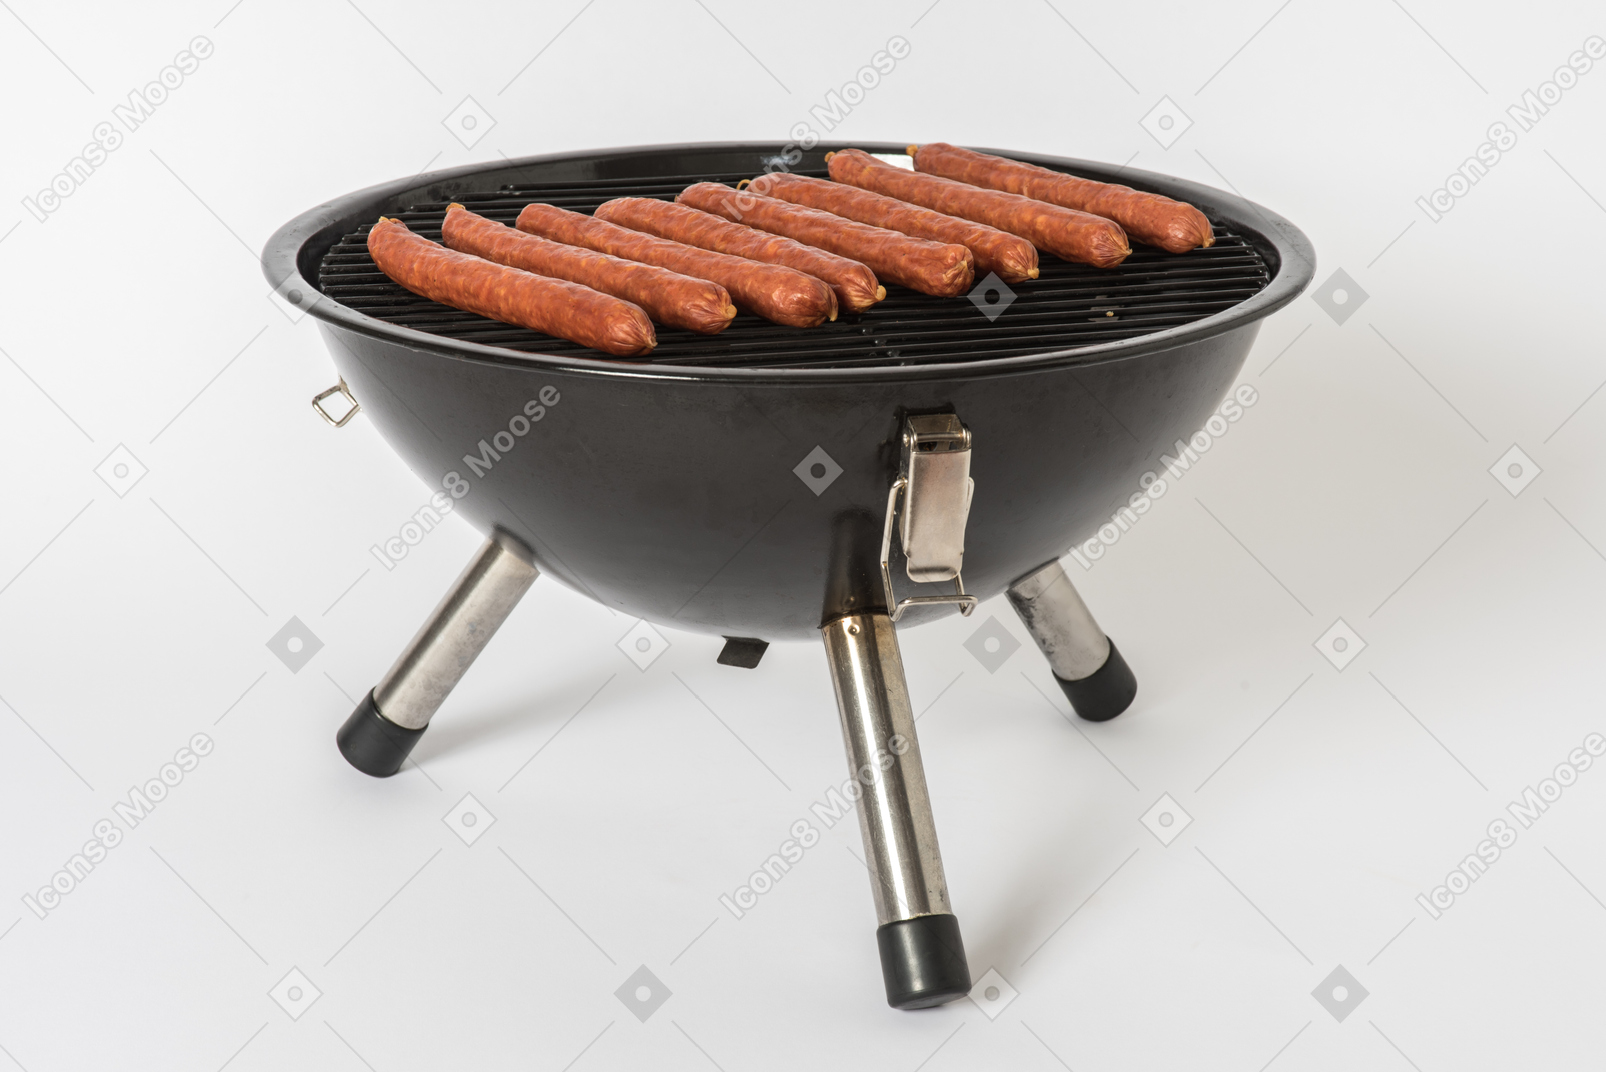 Few sausages on grill